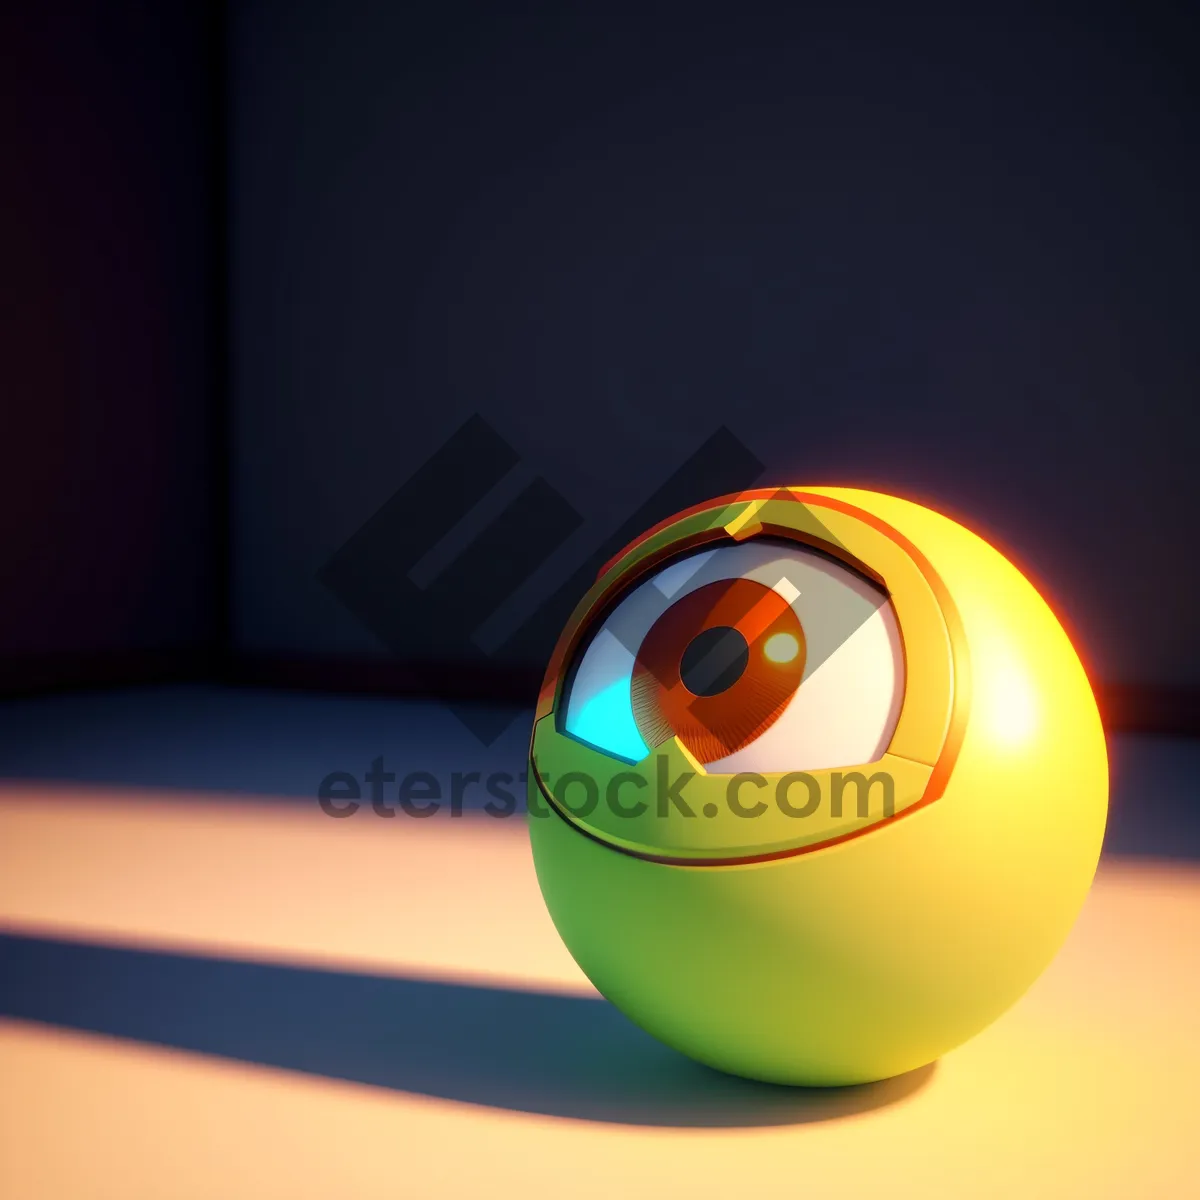 Picture of Playful 3D Sphere Icon for Competitive Games